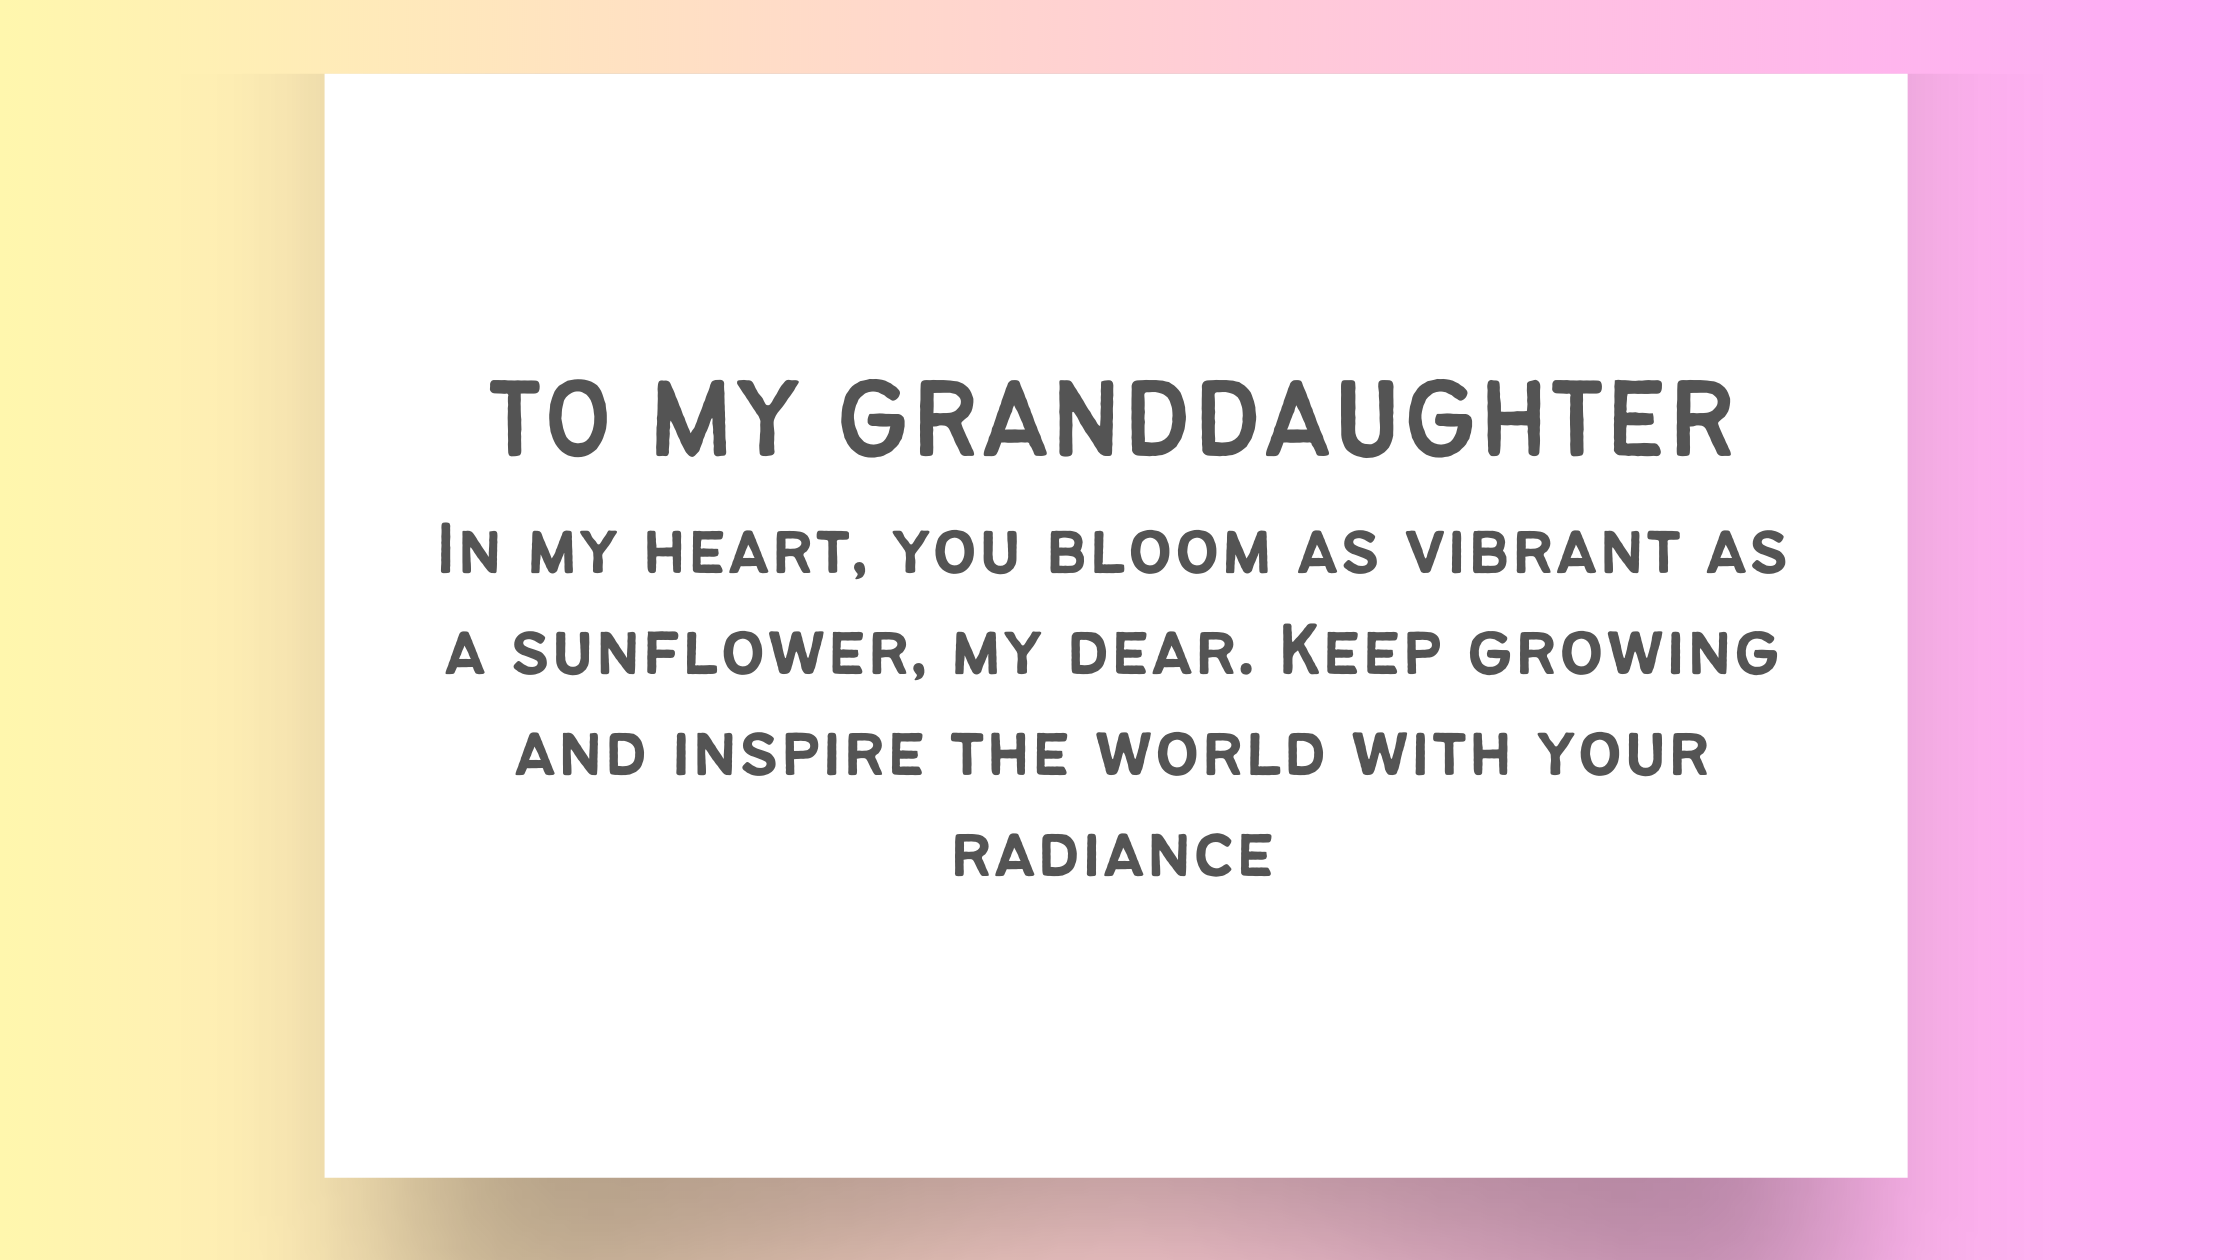 10 Heartfelt Inspirational Quotes from Grandma to Her Granddaughter